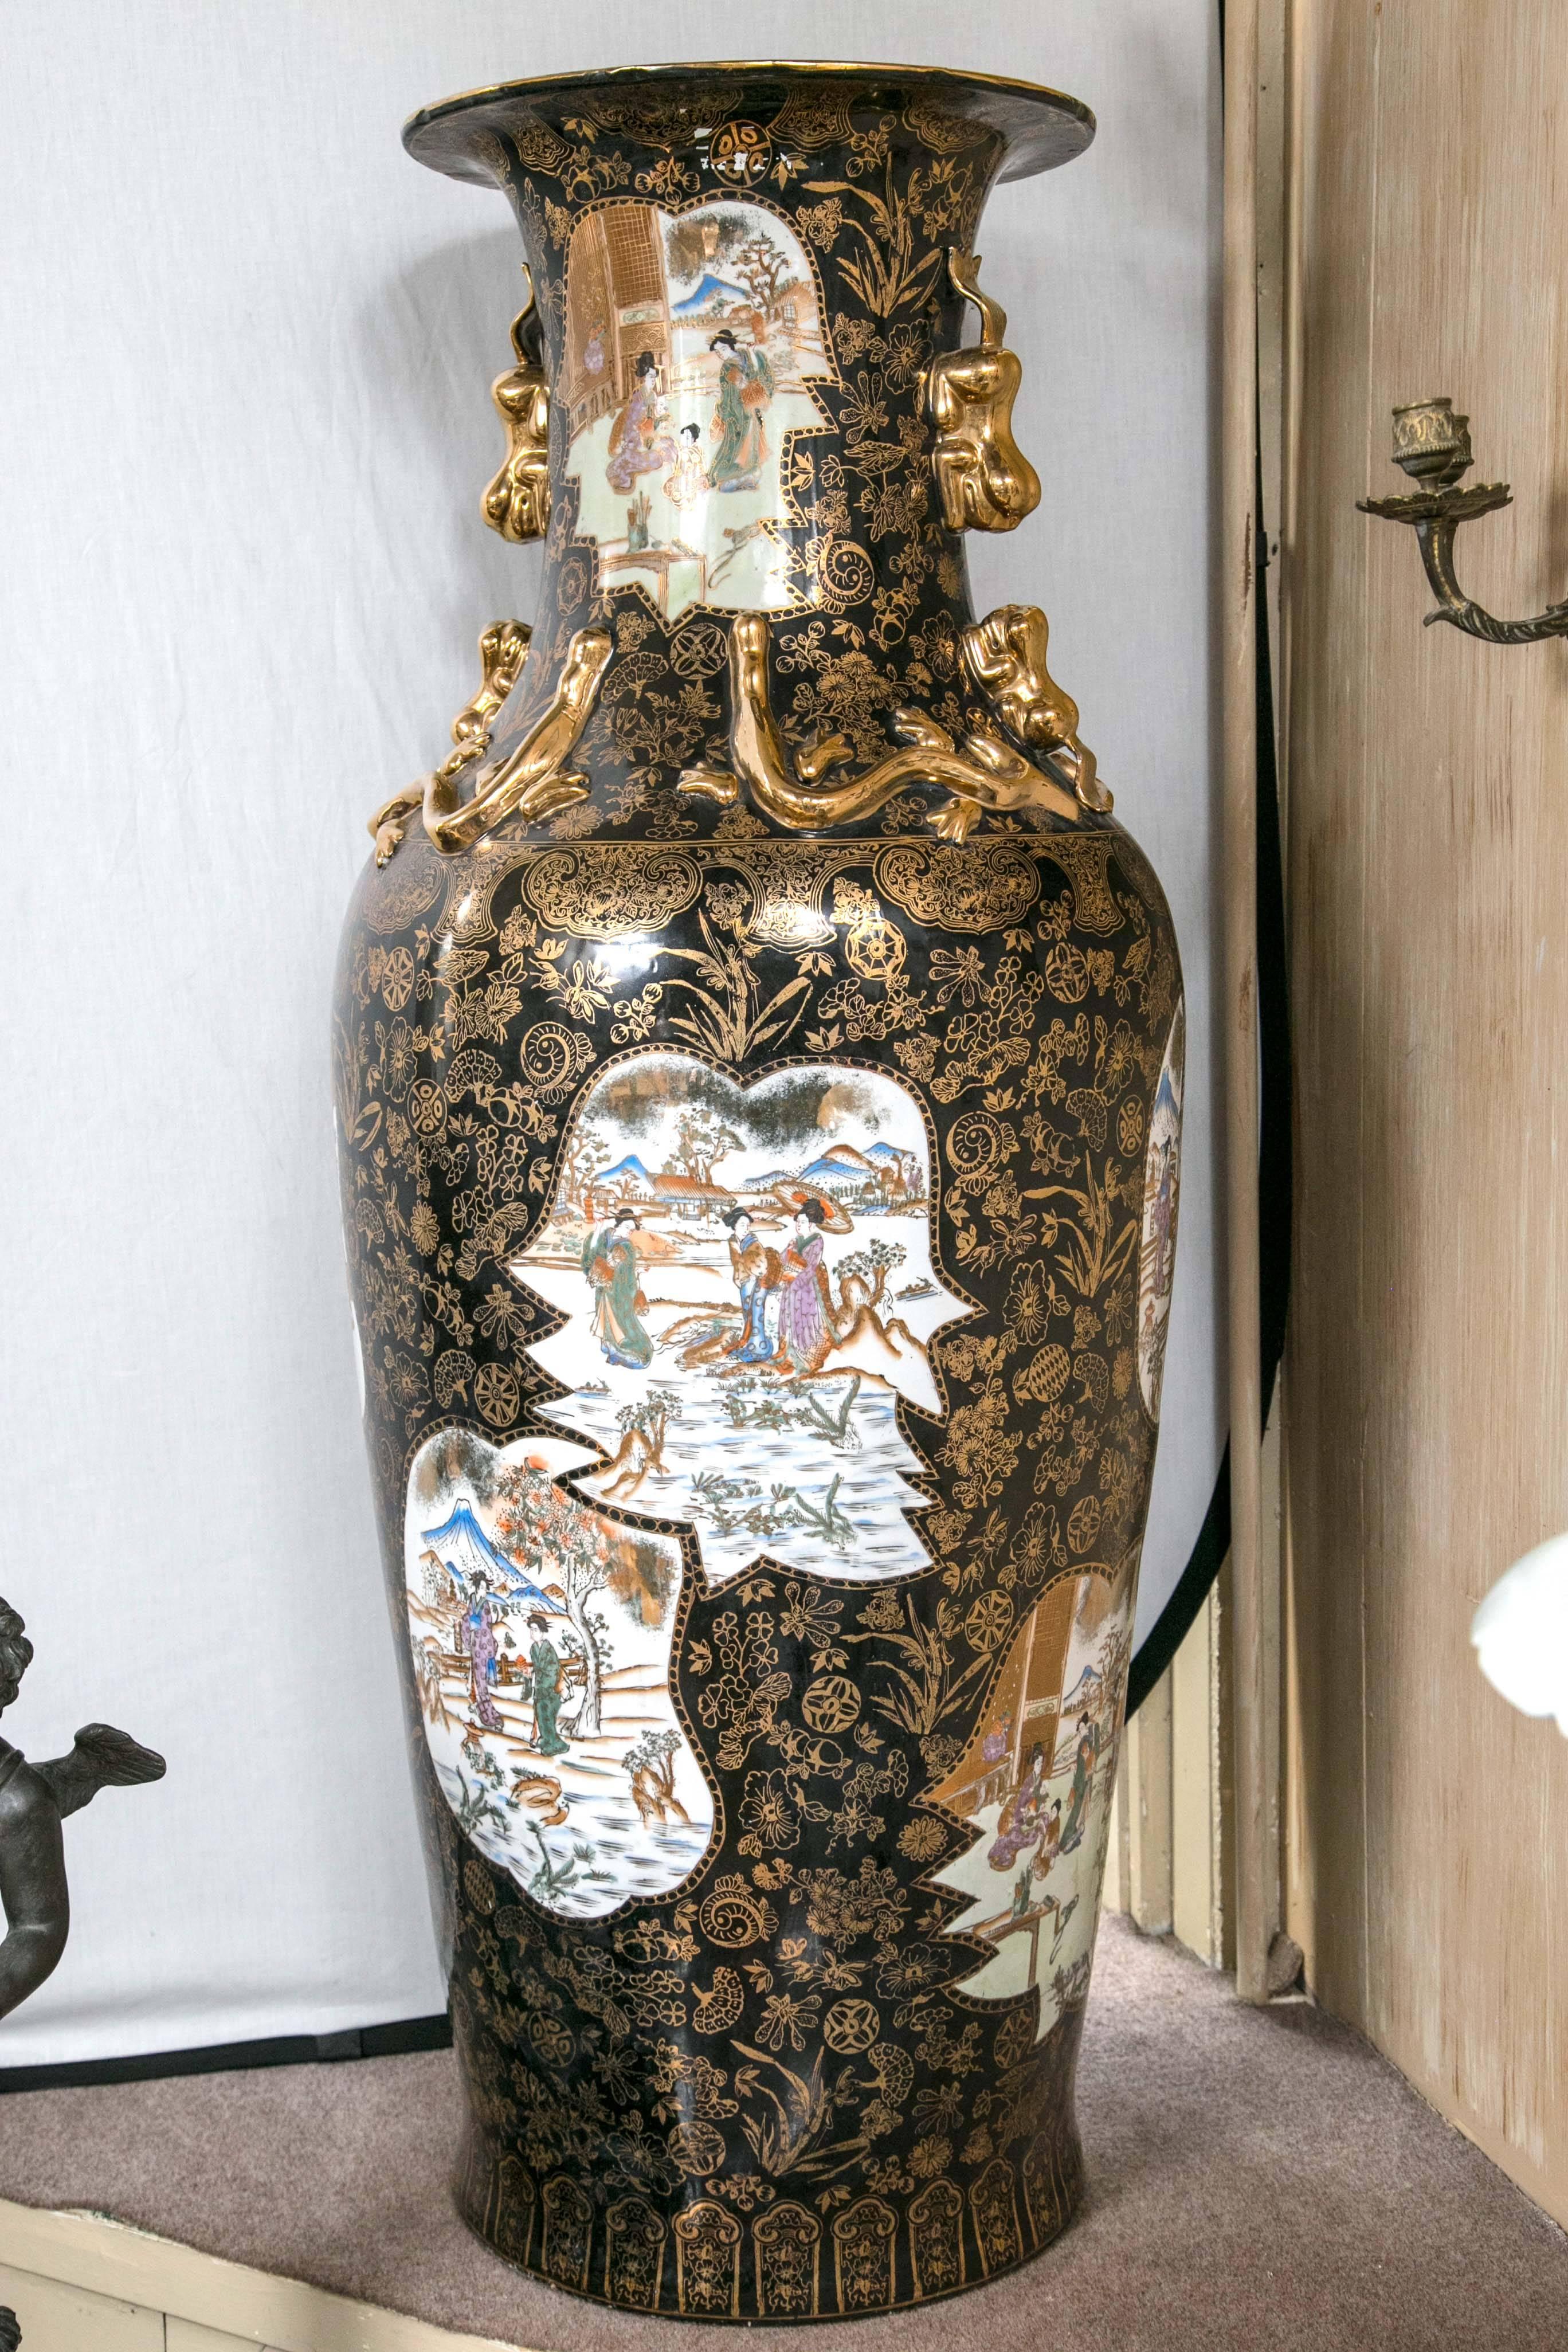 Standing 52 inches tall this pair is decorated with painted plaques in a black and gold ground. Gilded foo dogs and dragons decorate the neck.
Diameter of 22